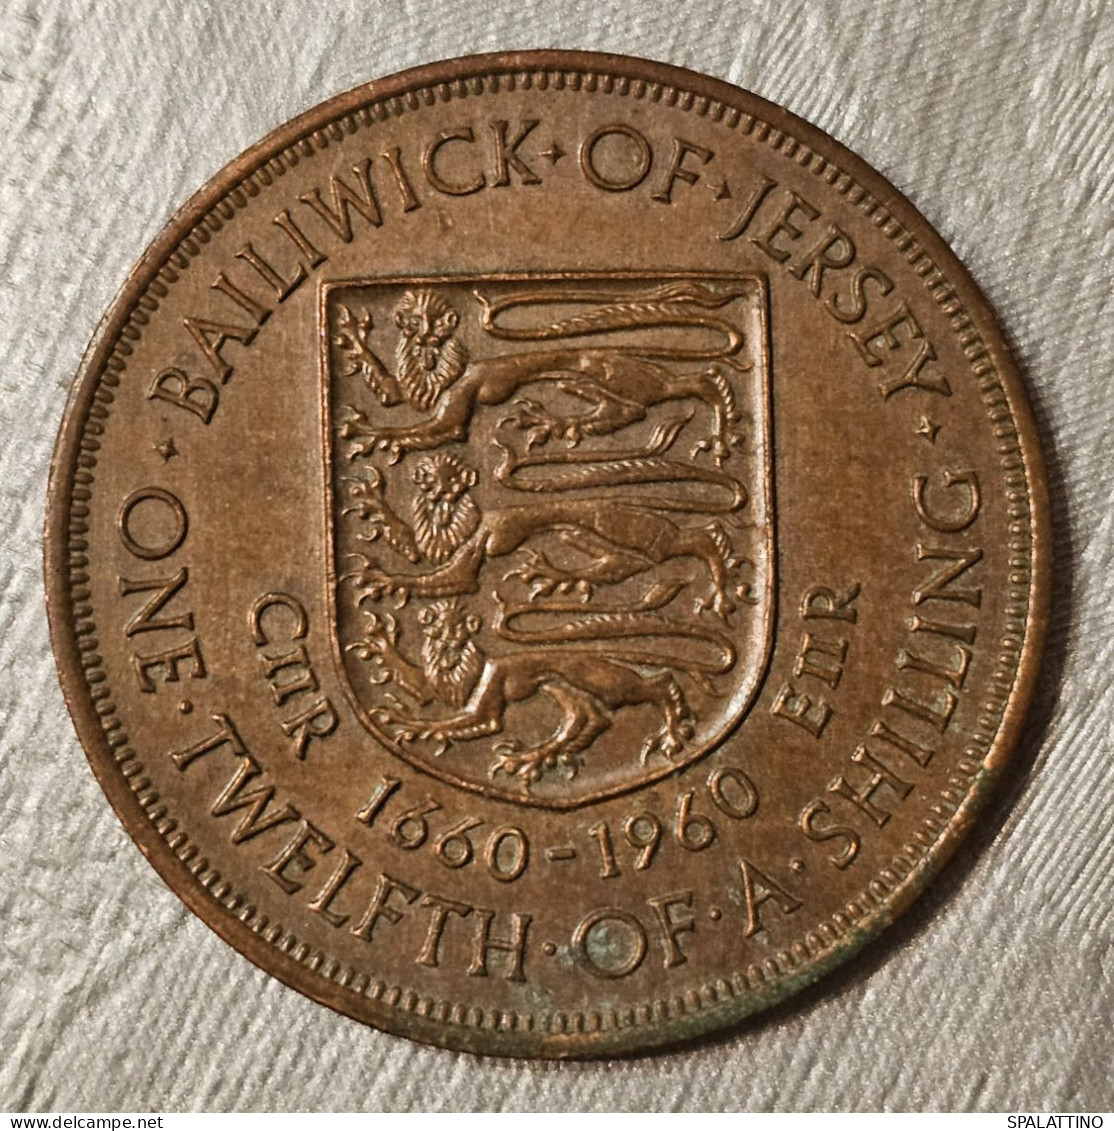 BAILIWICK OF JERSEY- 1/12 SHILLING 1960. - Channel Islands